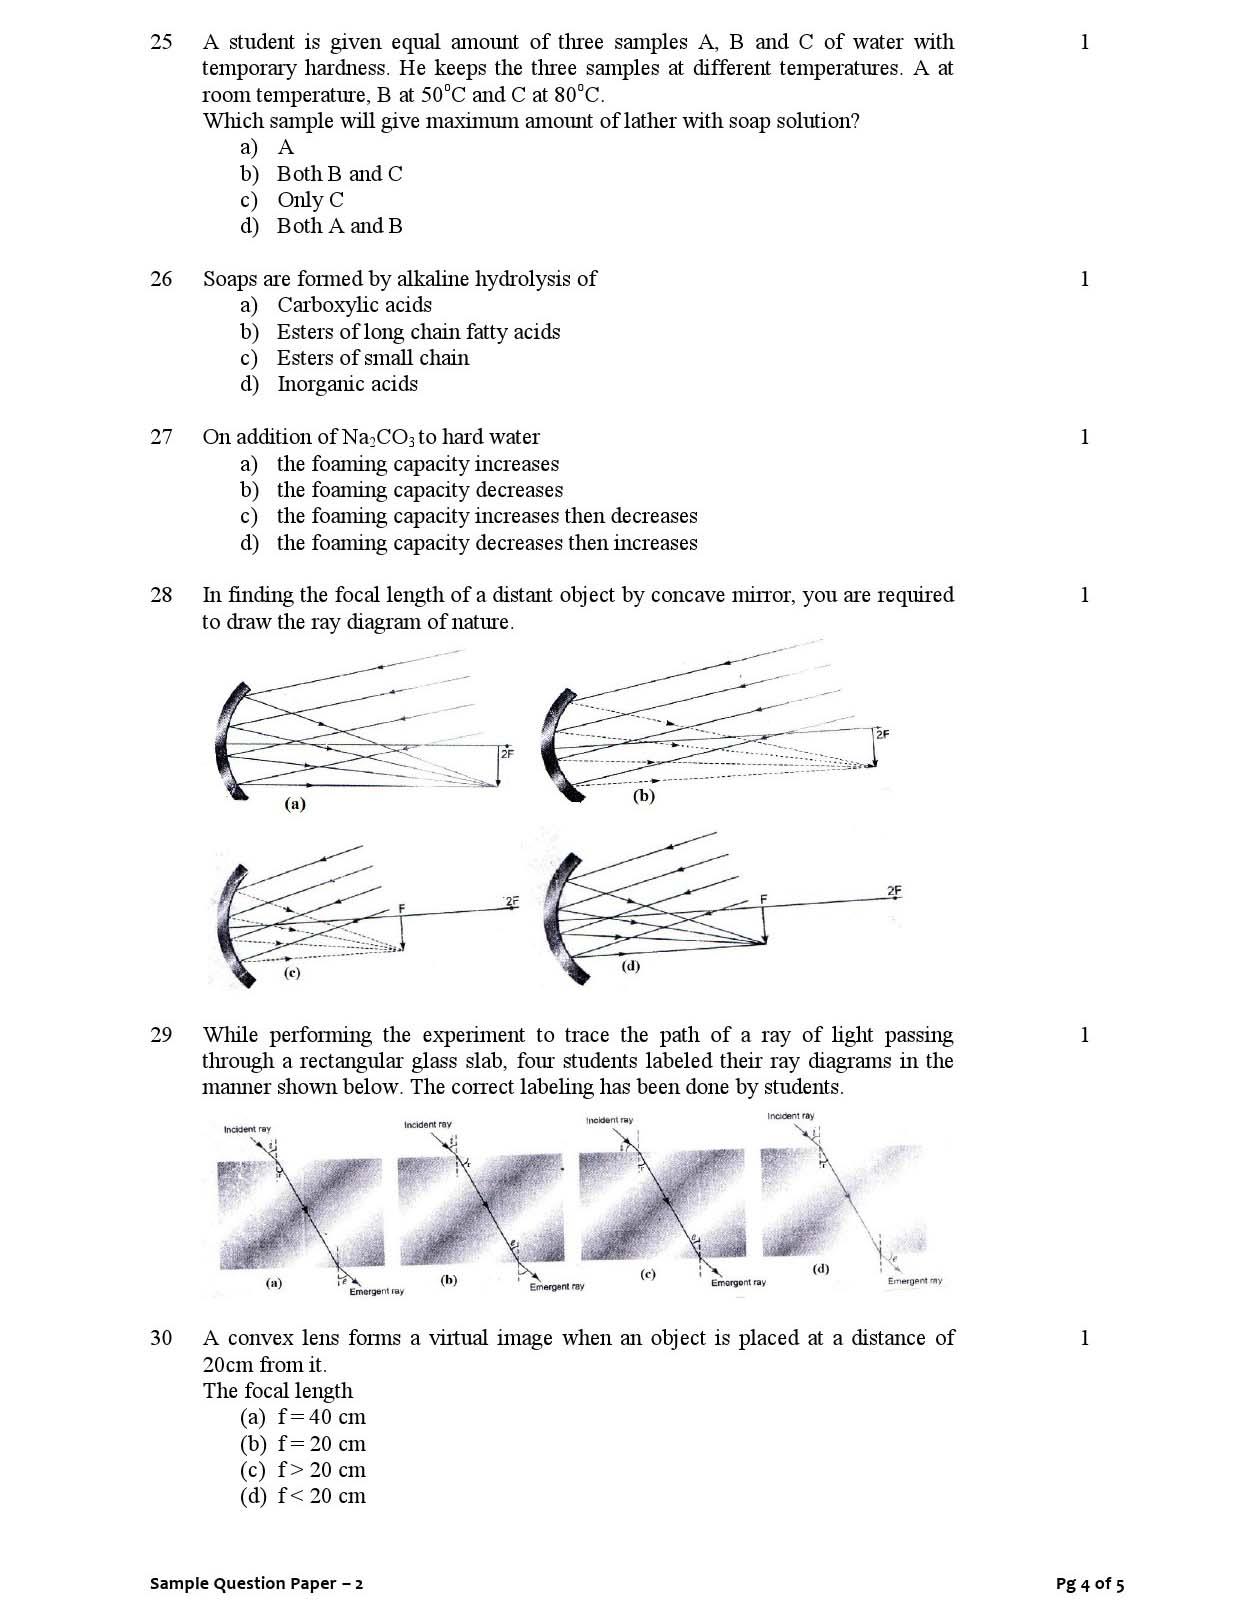 Science CBSE Class X Sample Question Paper 2015 16 - Image 4